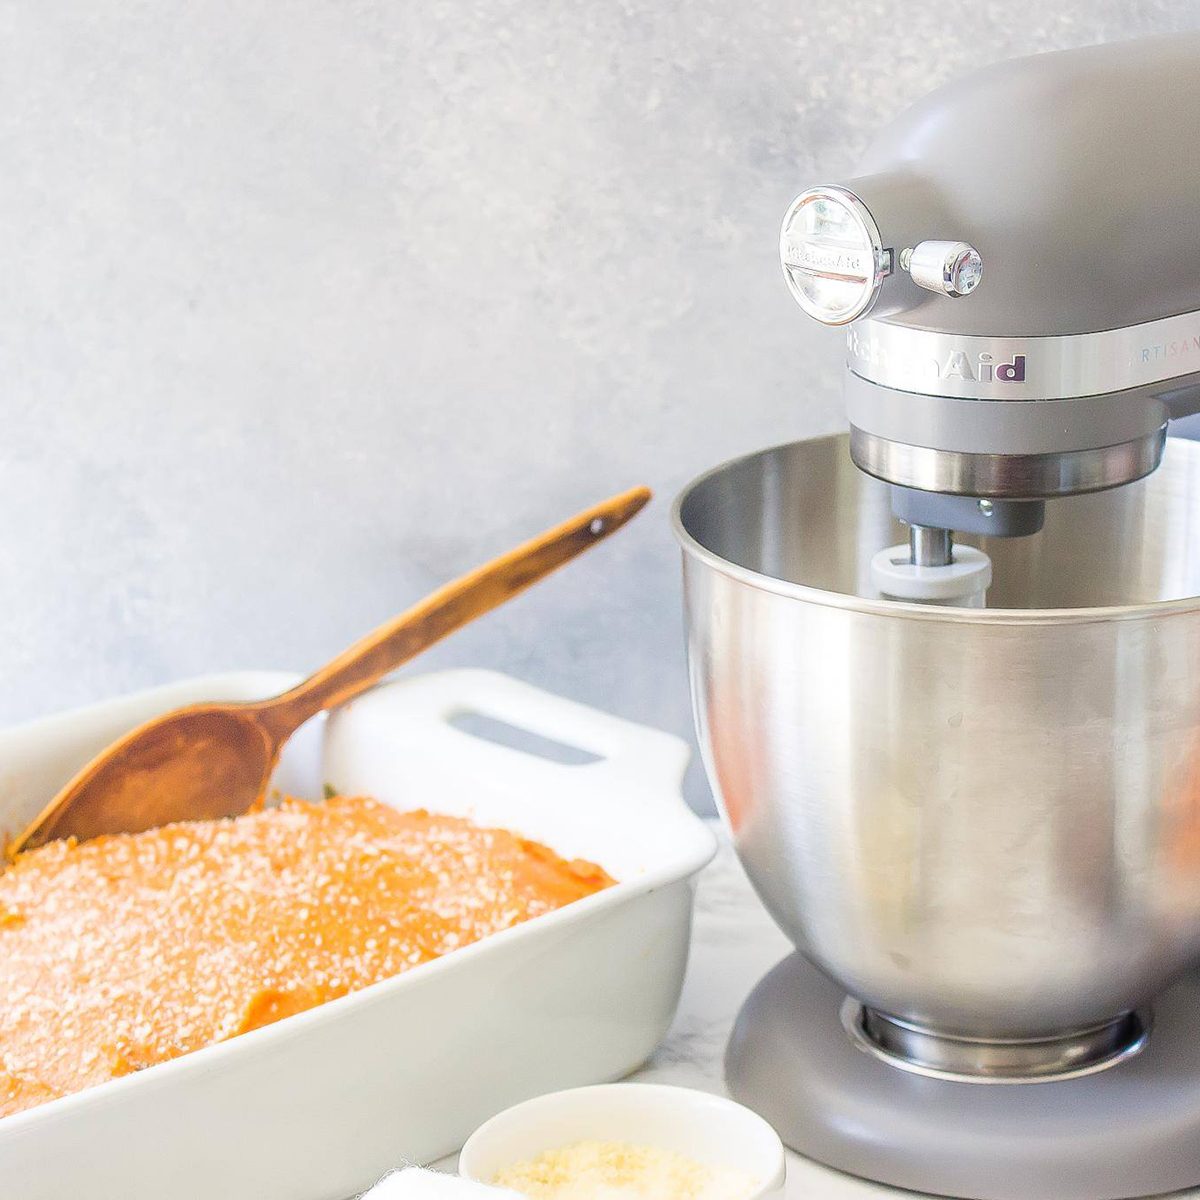 How to Use a Stand Mixer: Don't Make These Mistakes